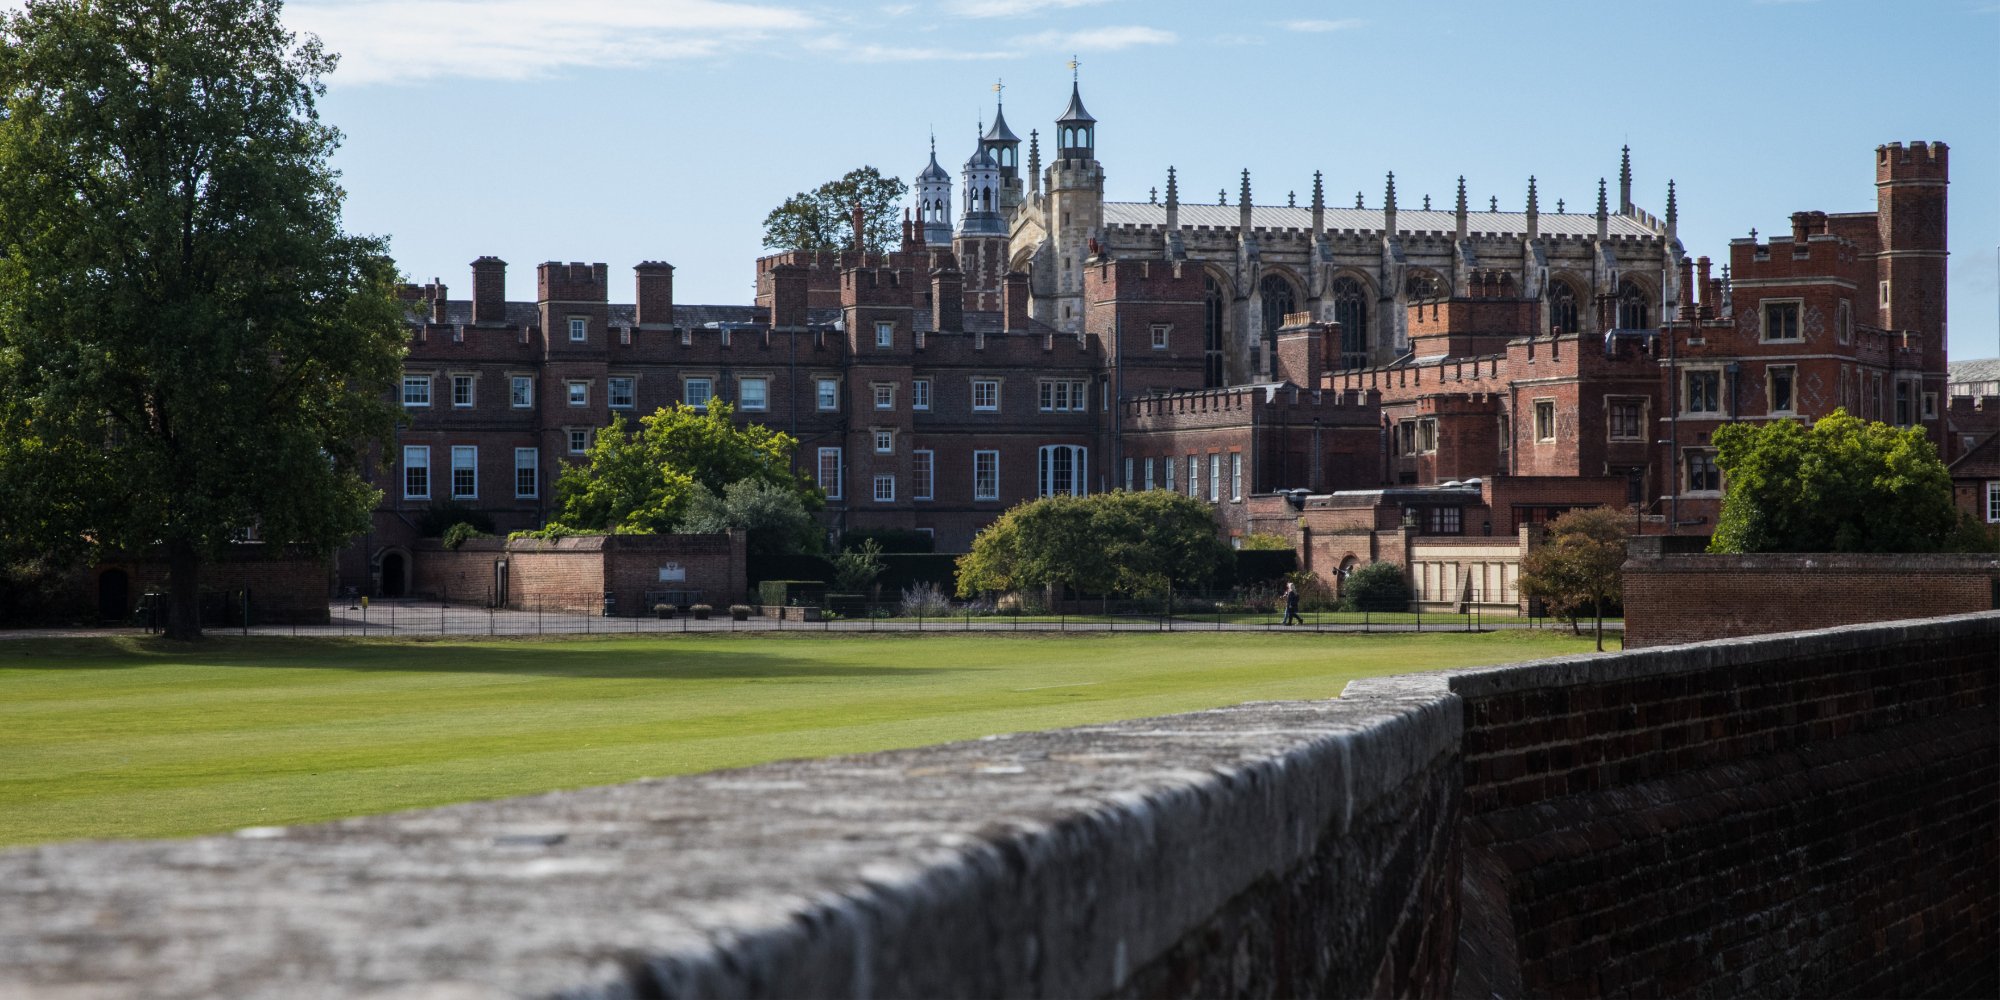 'The Crown' season 5 filming was reportedly blocked at Eton College where royal family members Princes William and Harry attended school.